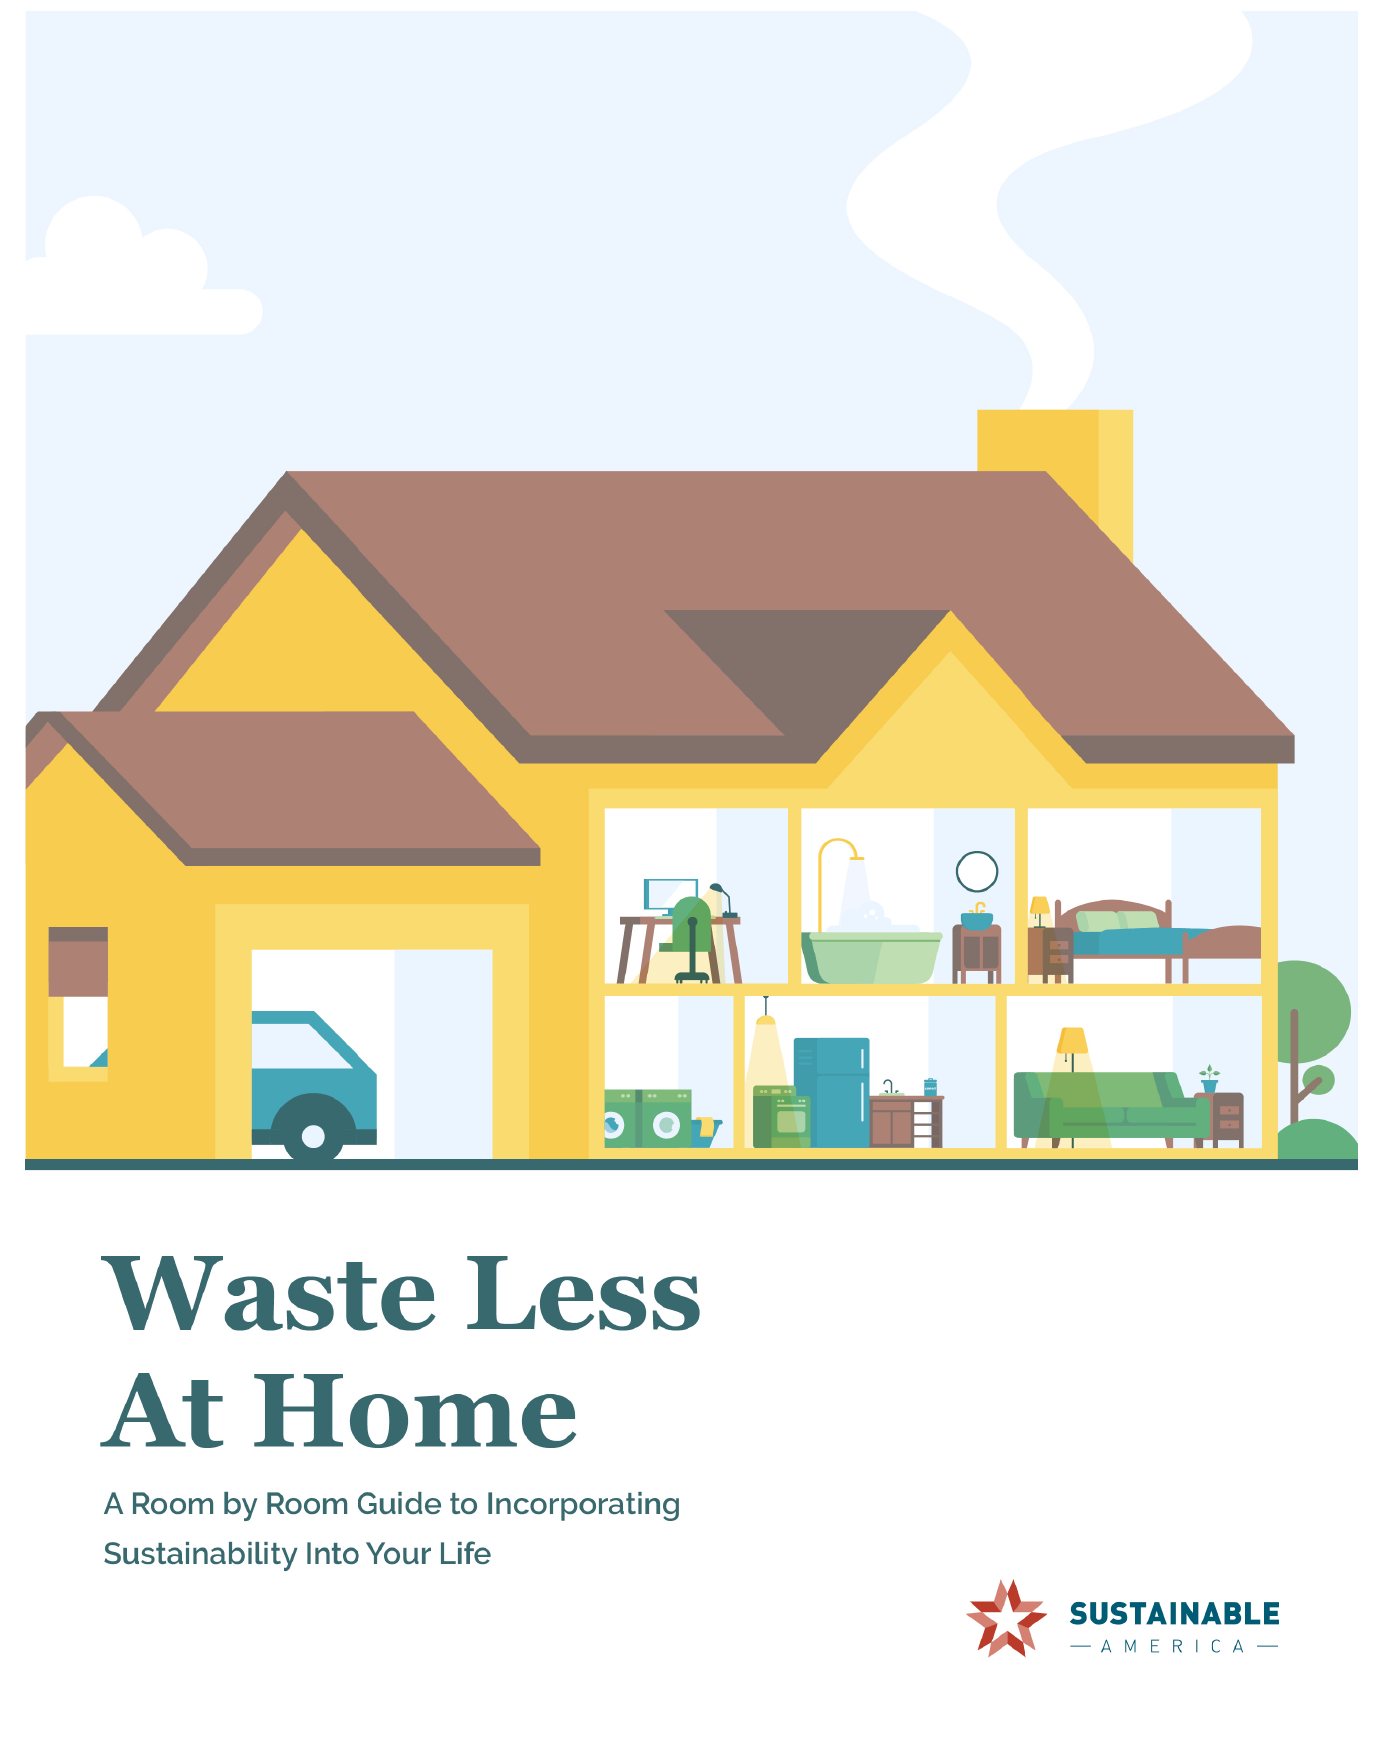 Toolkit - Waste Less At Home - A Room by Room Guide to Incorporating Sustainability Into Your Life